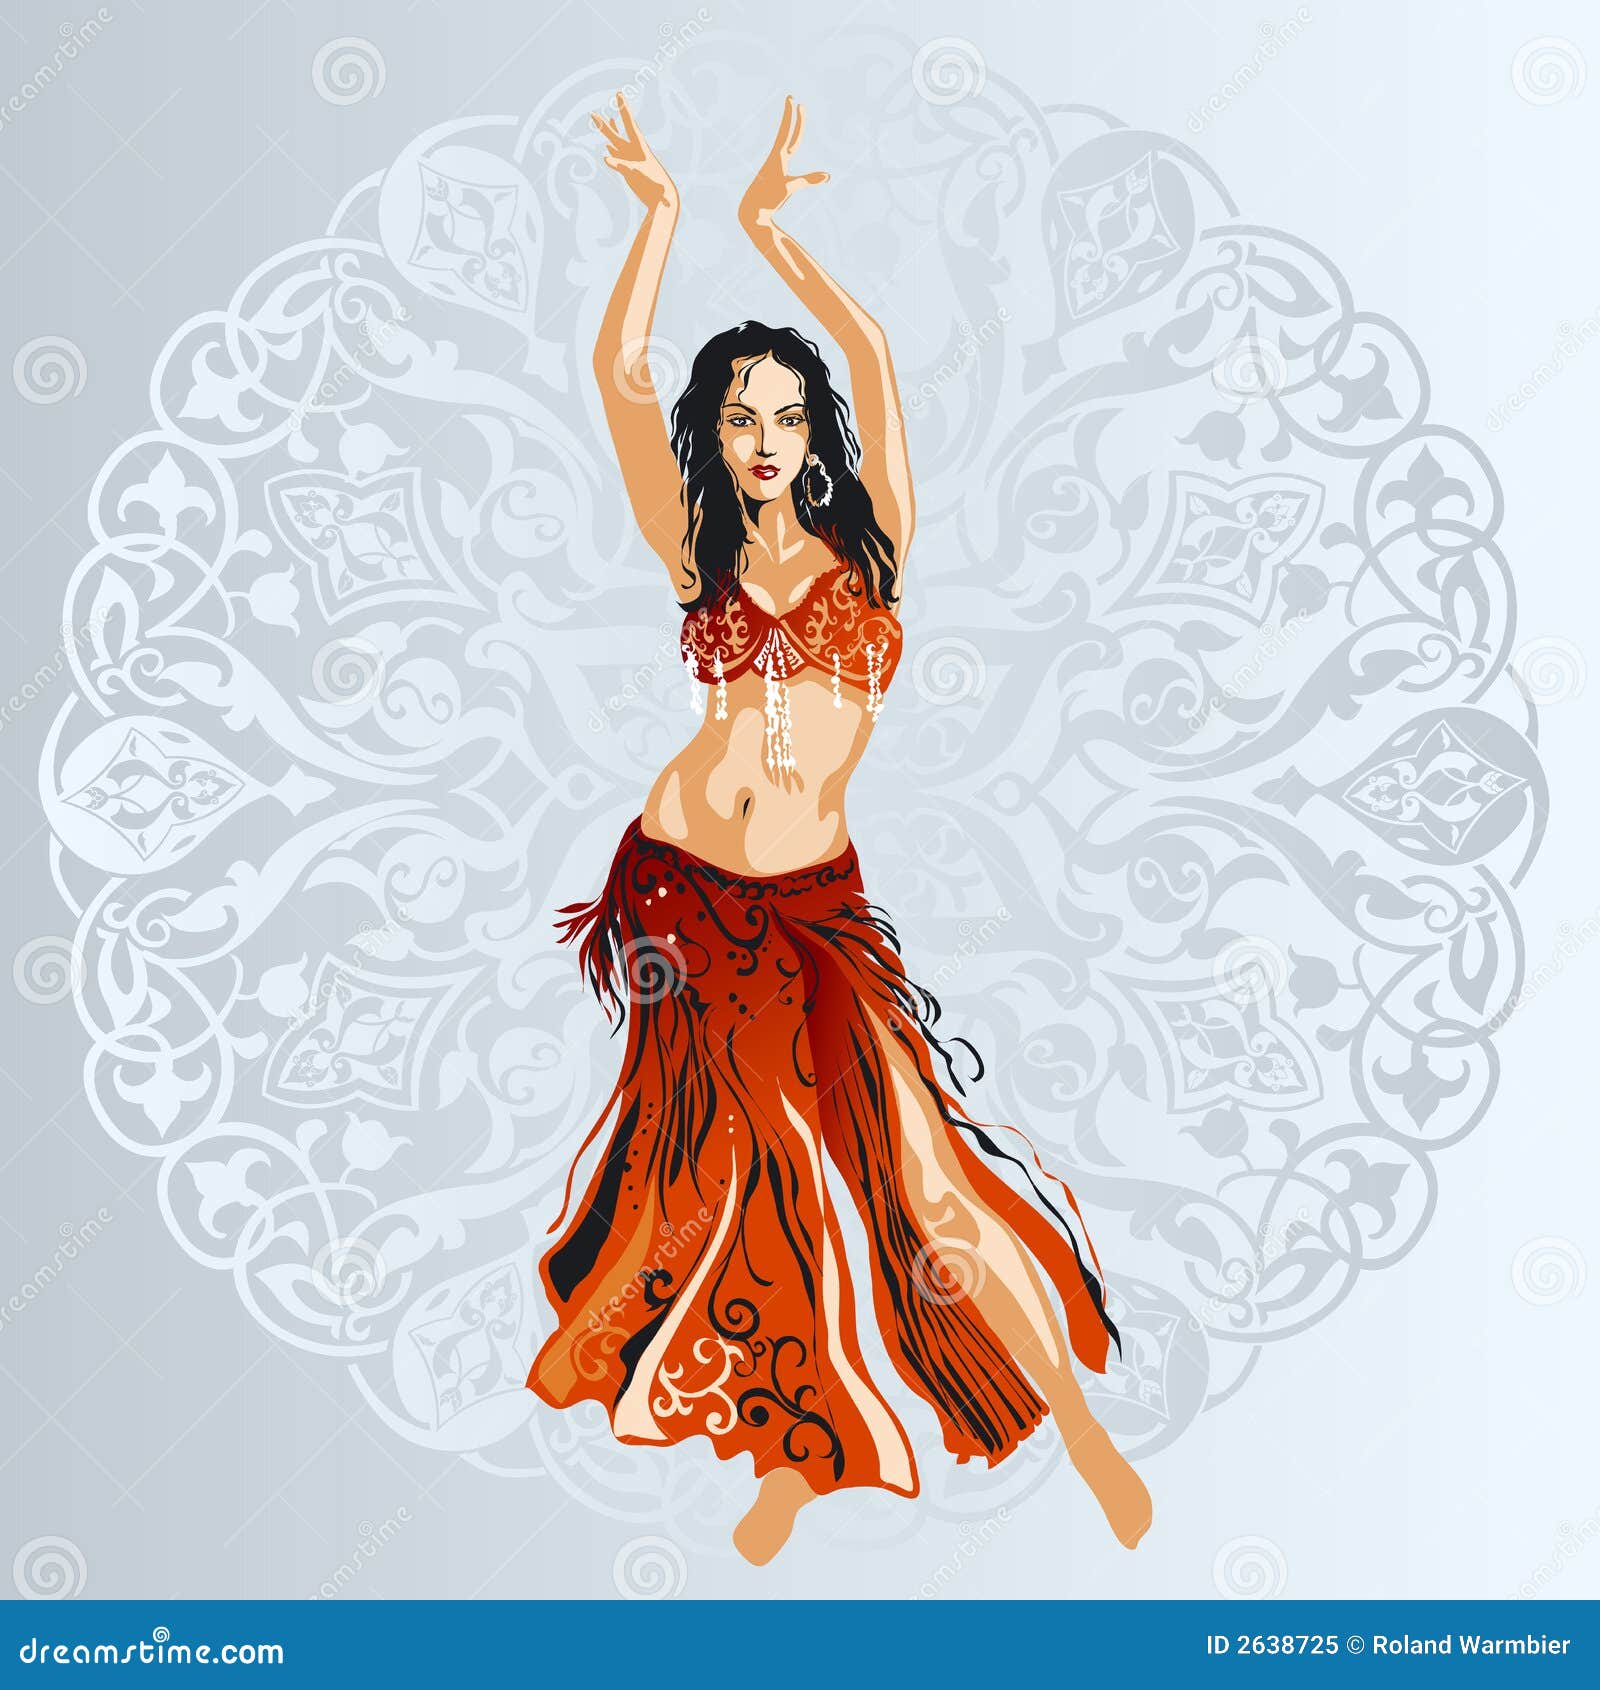 belly dance clipart - photo #34